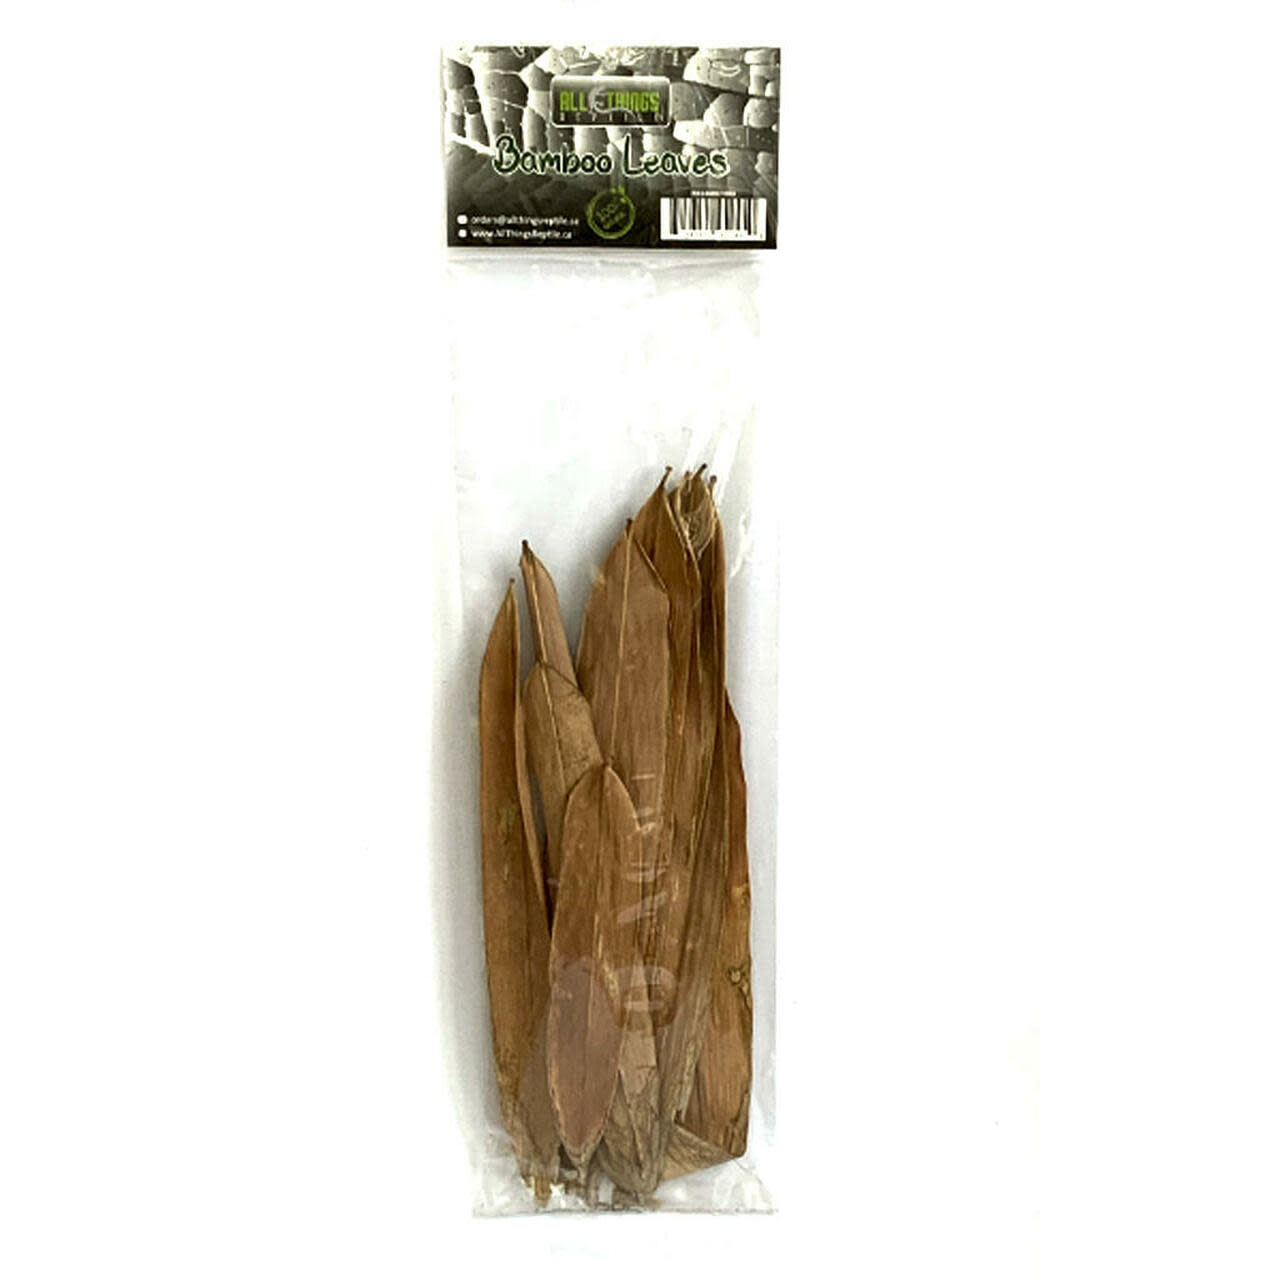 All things reptile Bamboo Mix Size Leaves 10-pack